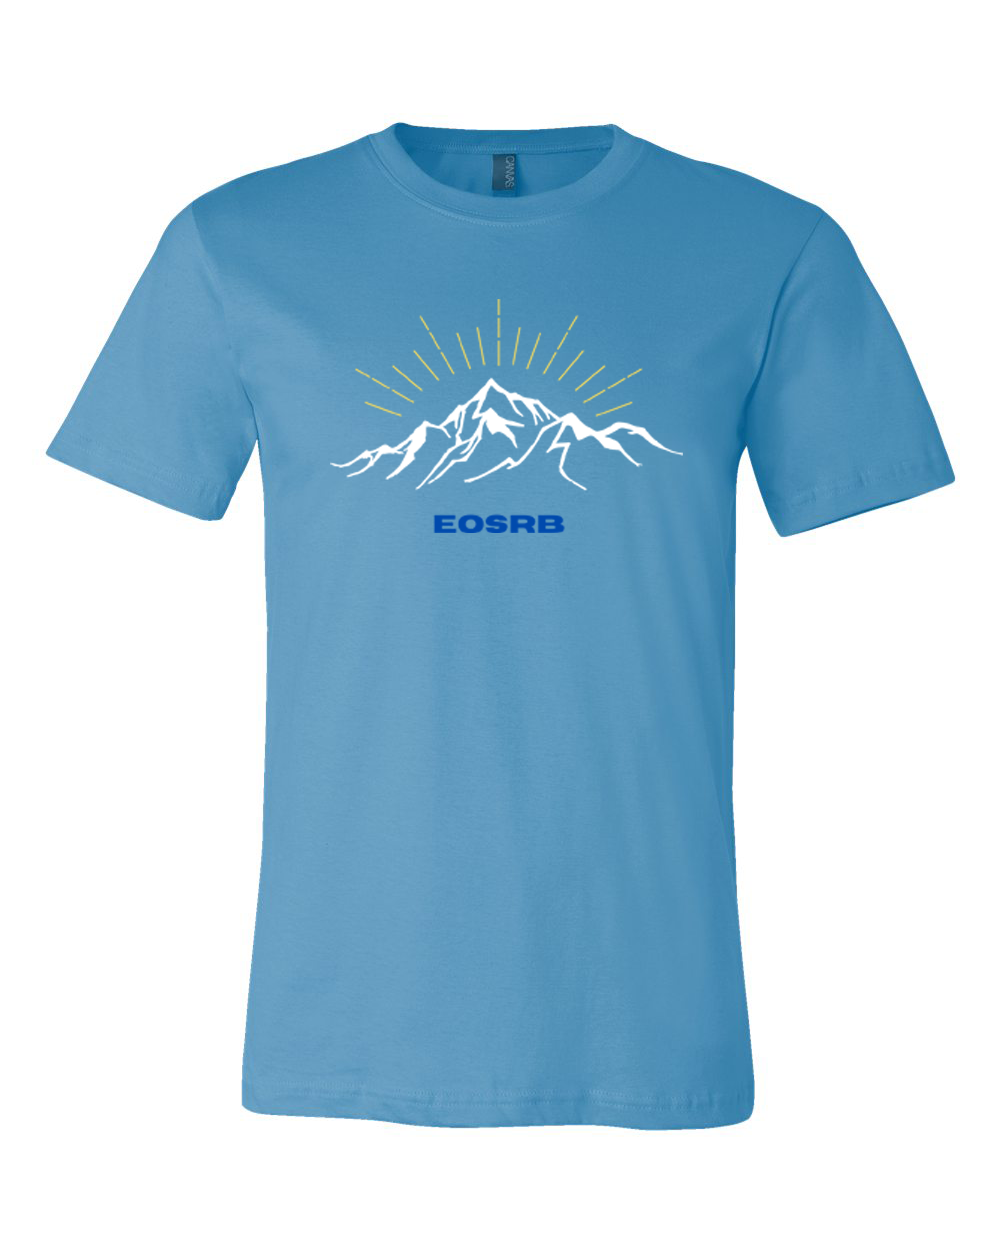 Elements of Something Really Beautiful : Mountain Tee